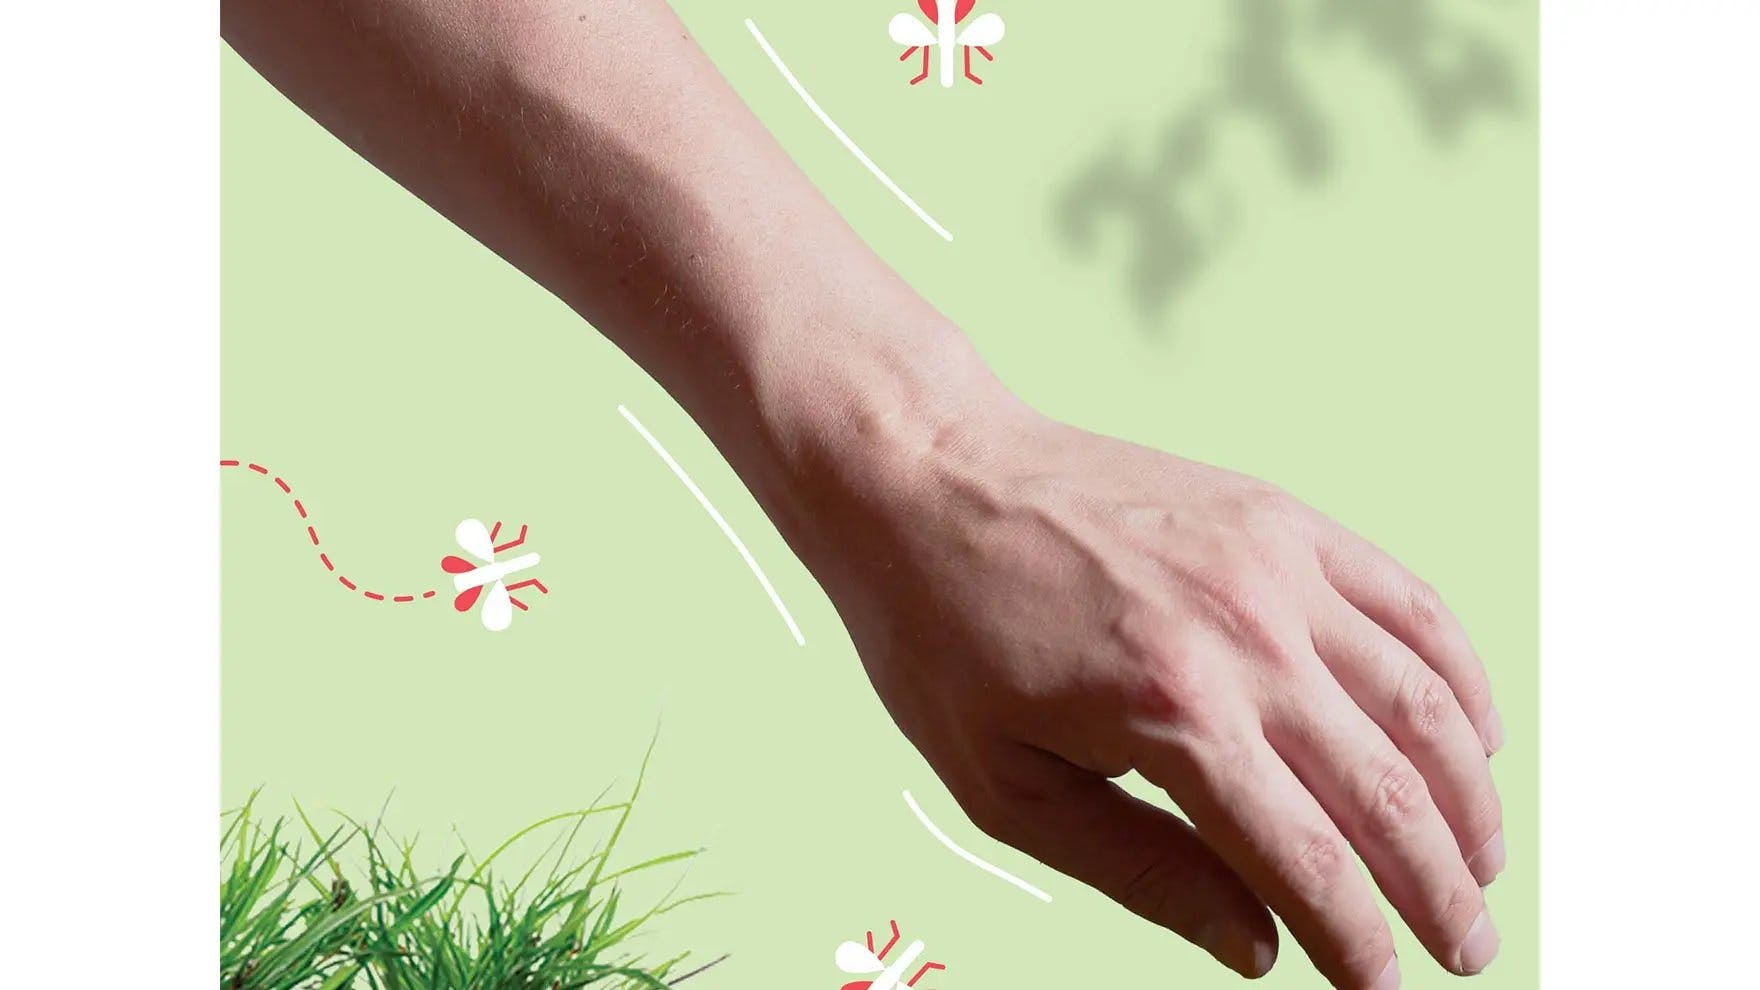 Close up of an arm on a green background with illustrated bugs flying around it